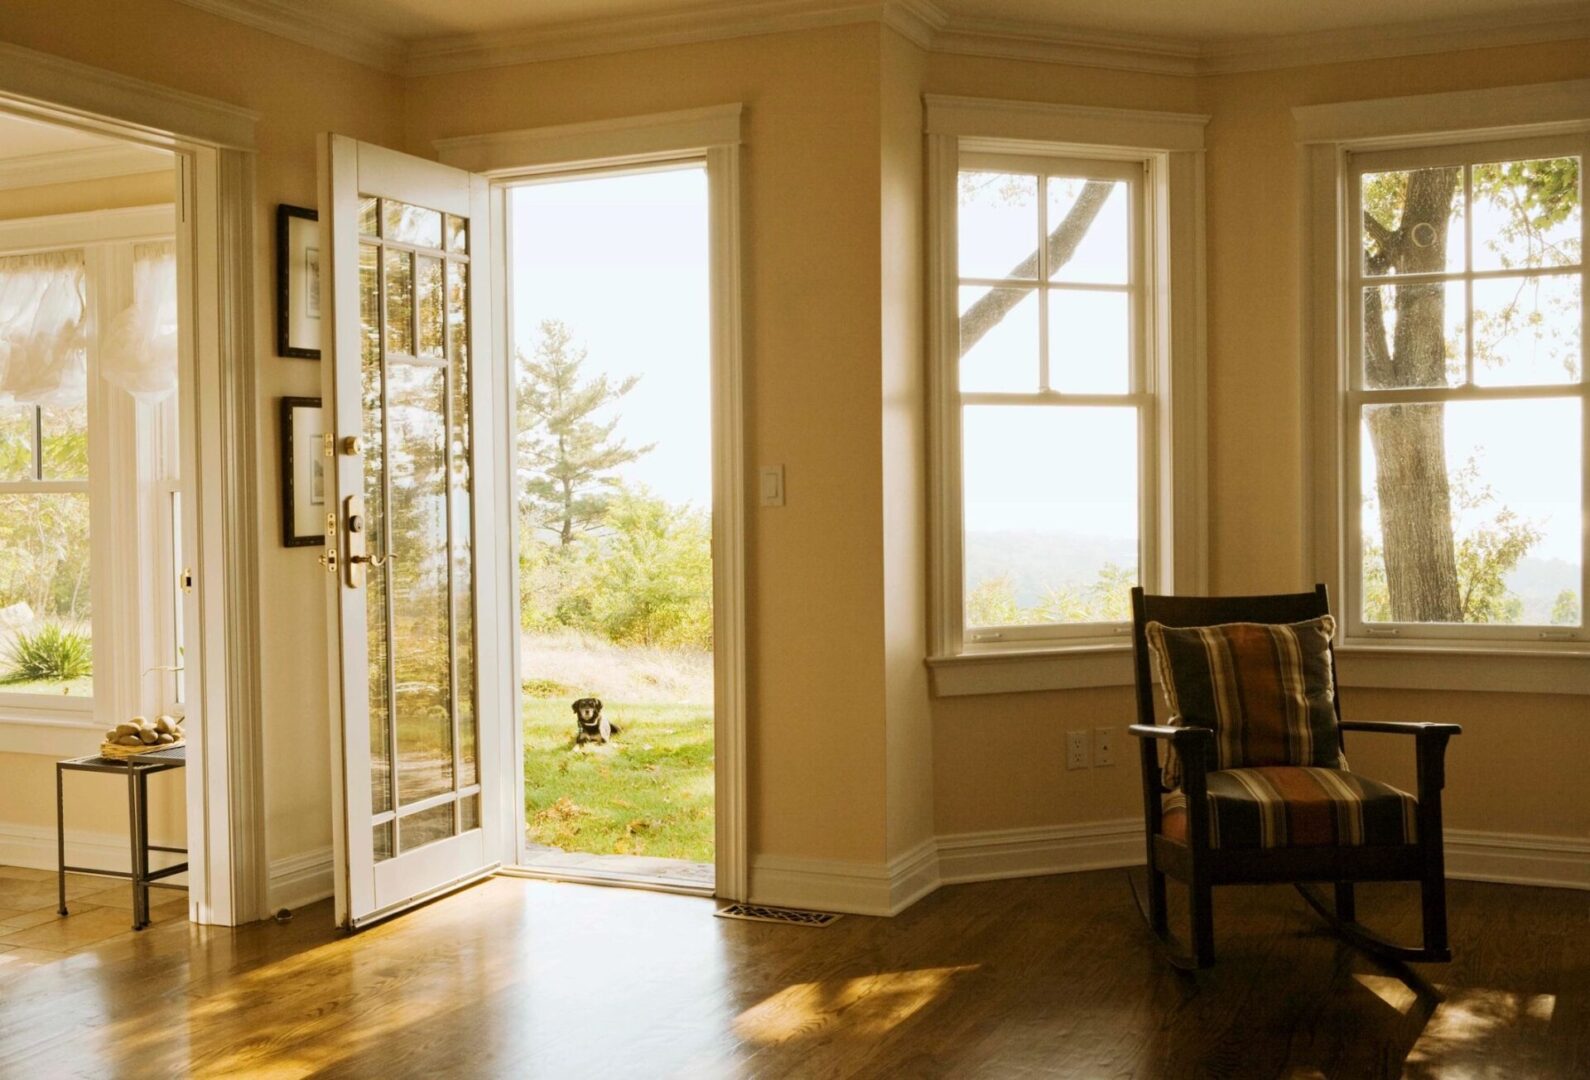 view of a room and a dog sitting outside